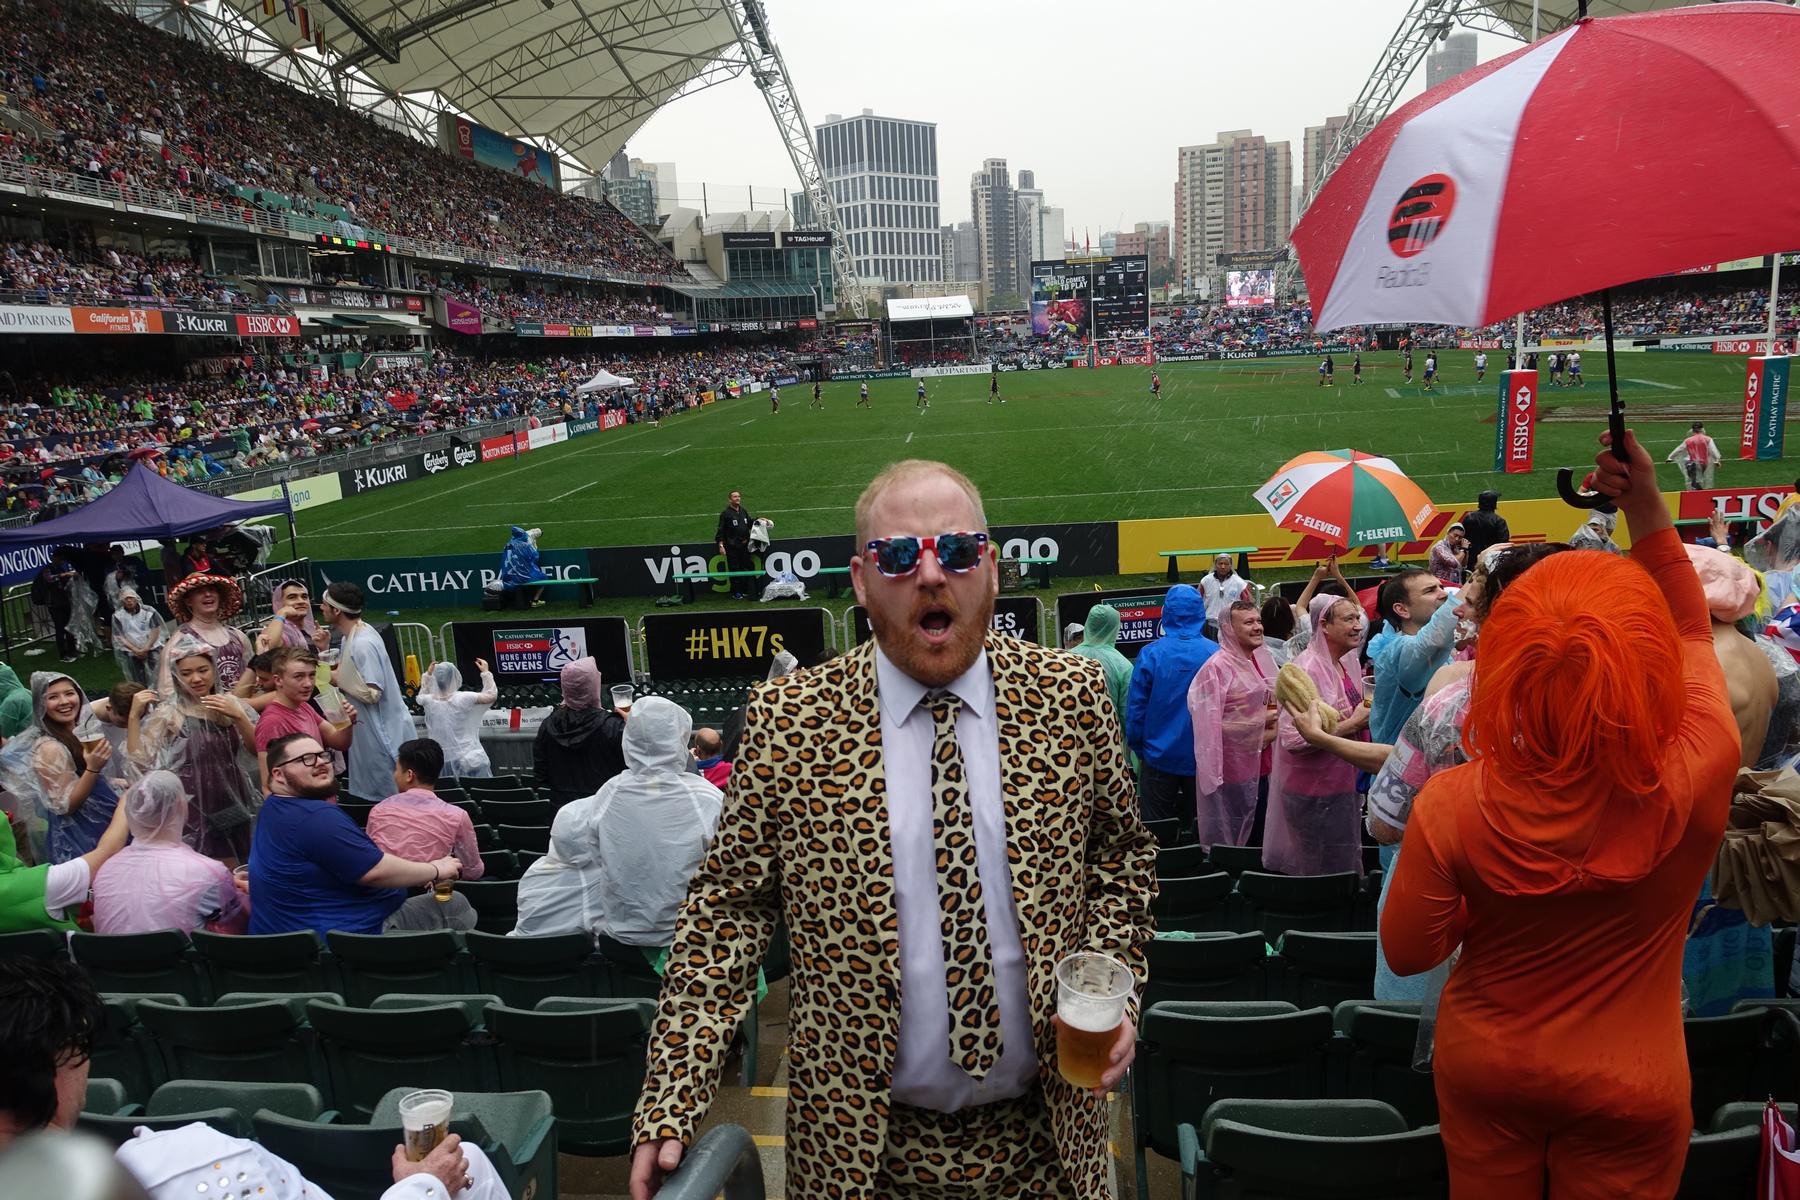 Photos: Hong Kong Rugby Sevens 2016 - South Stand - TopMiles